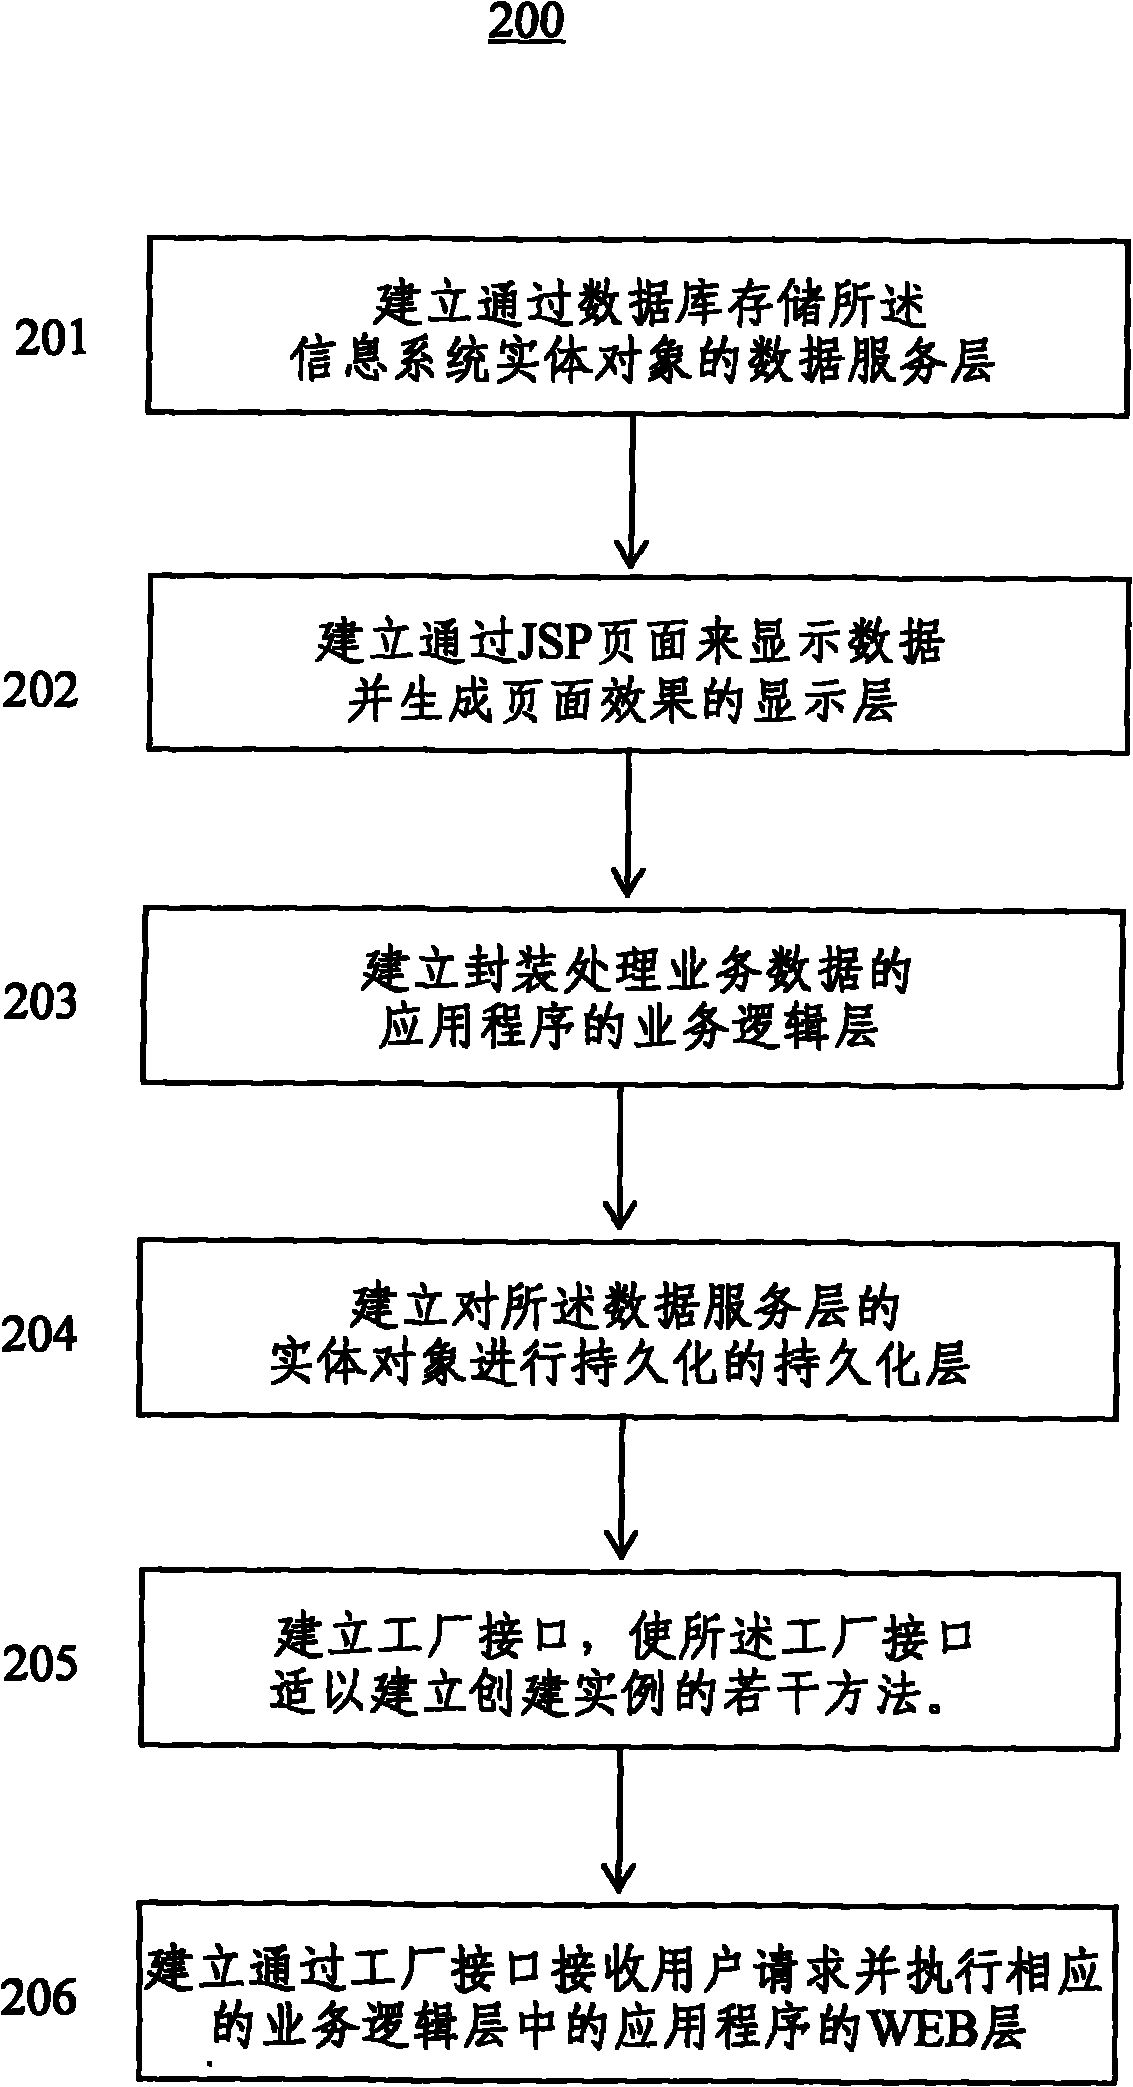 Factory pattern-based information system architecture and architecture method